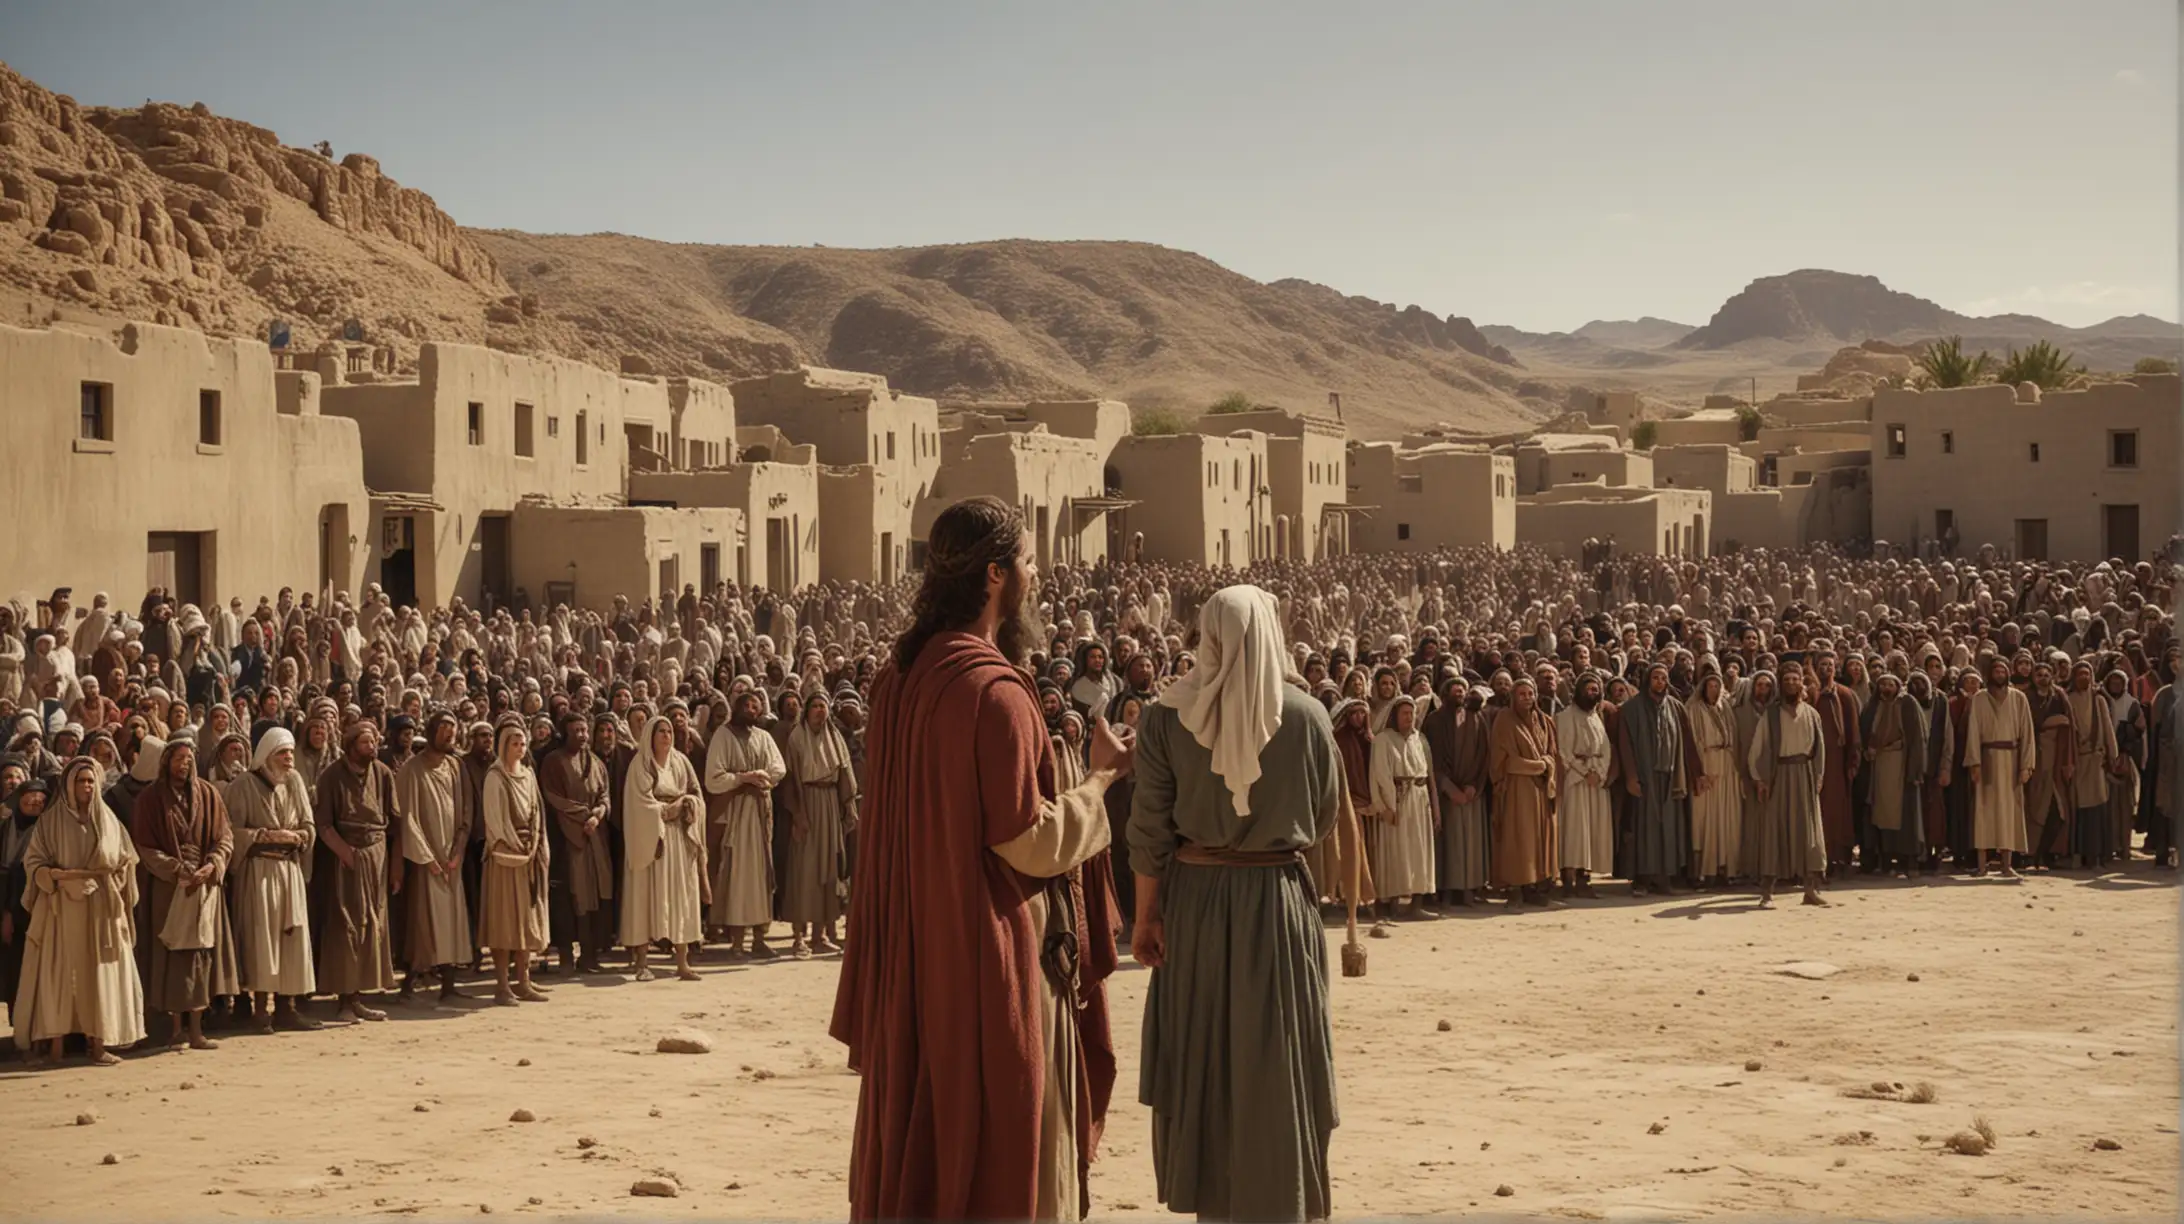  a woman and a man  standing in a desert town, with a crowd of people listening to them, during the Biblical era of Joshua.